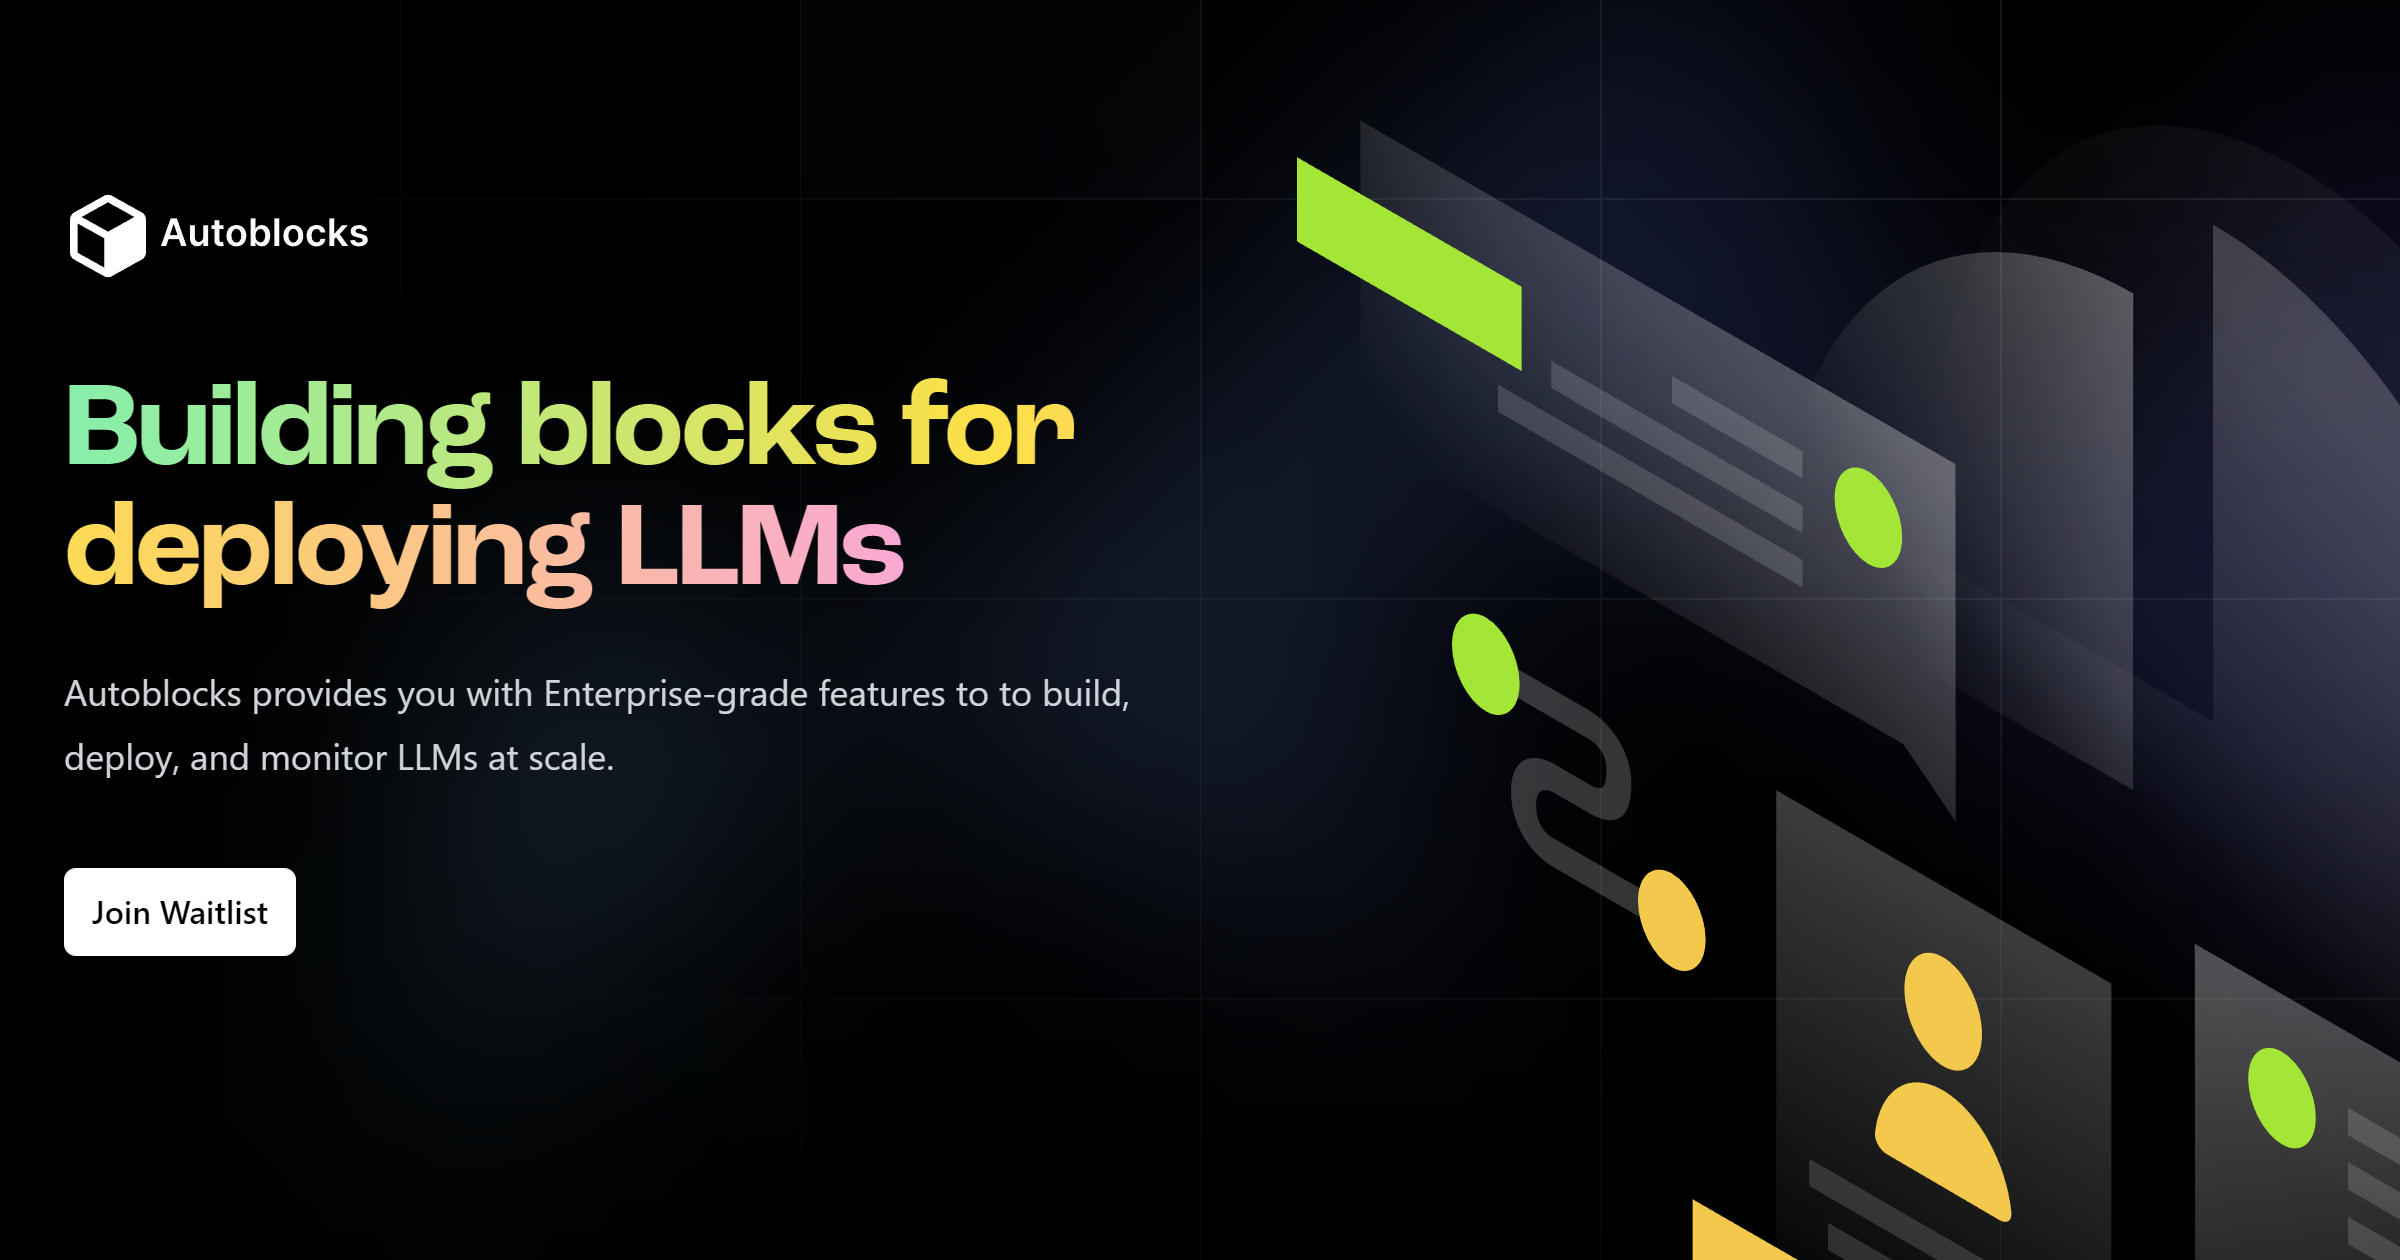 Autoblocks AI - A tool to build, deploy, and monitor LLMs